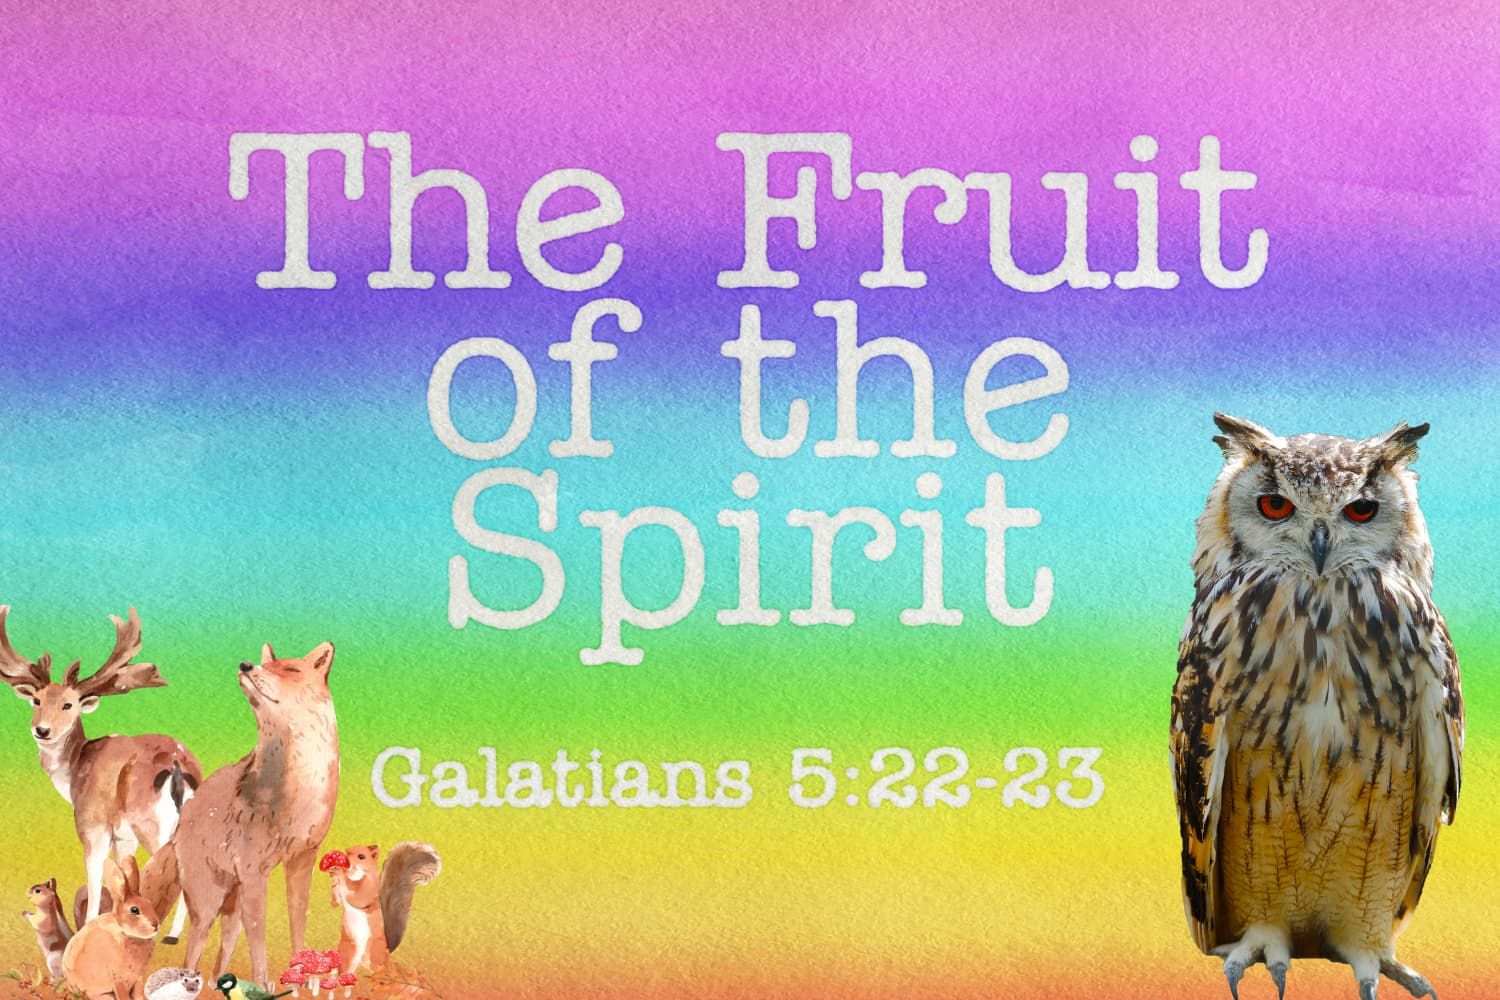 Parable%20-%20Wise%20owl%20and%20fruit%20of%20the%20spirit-d9417540 Faithful / trustworthy